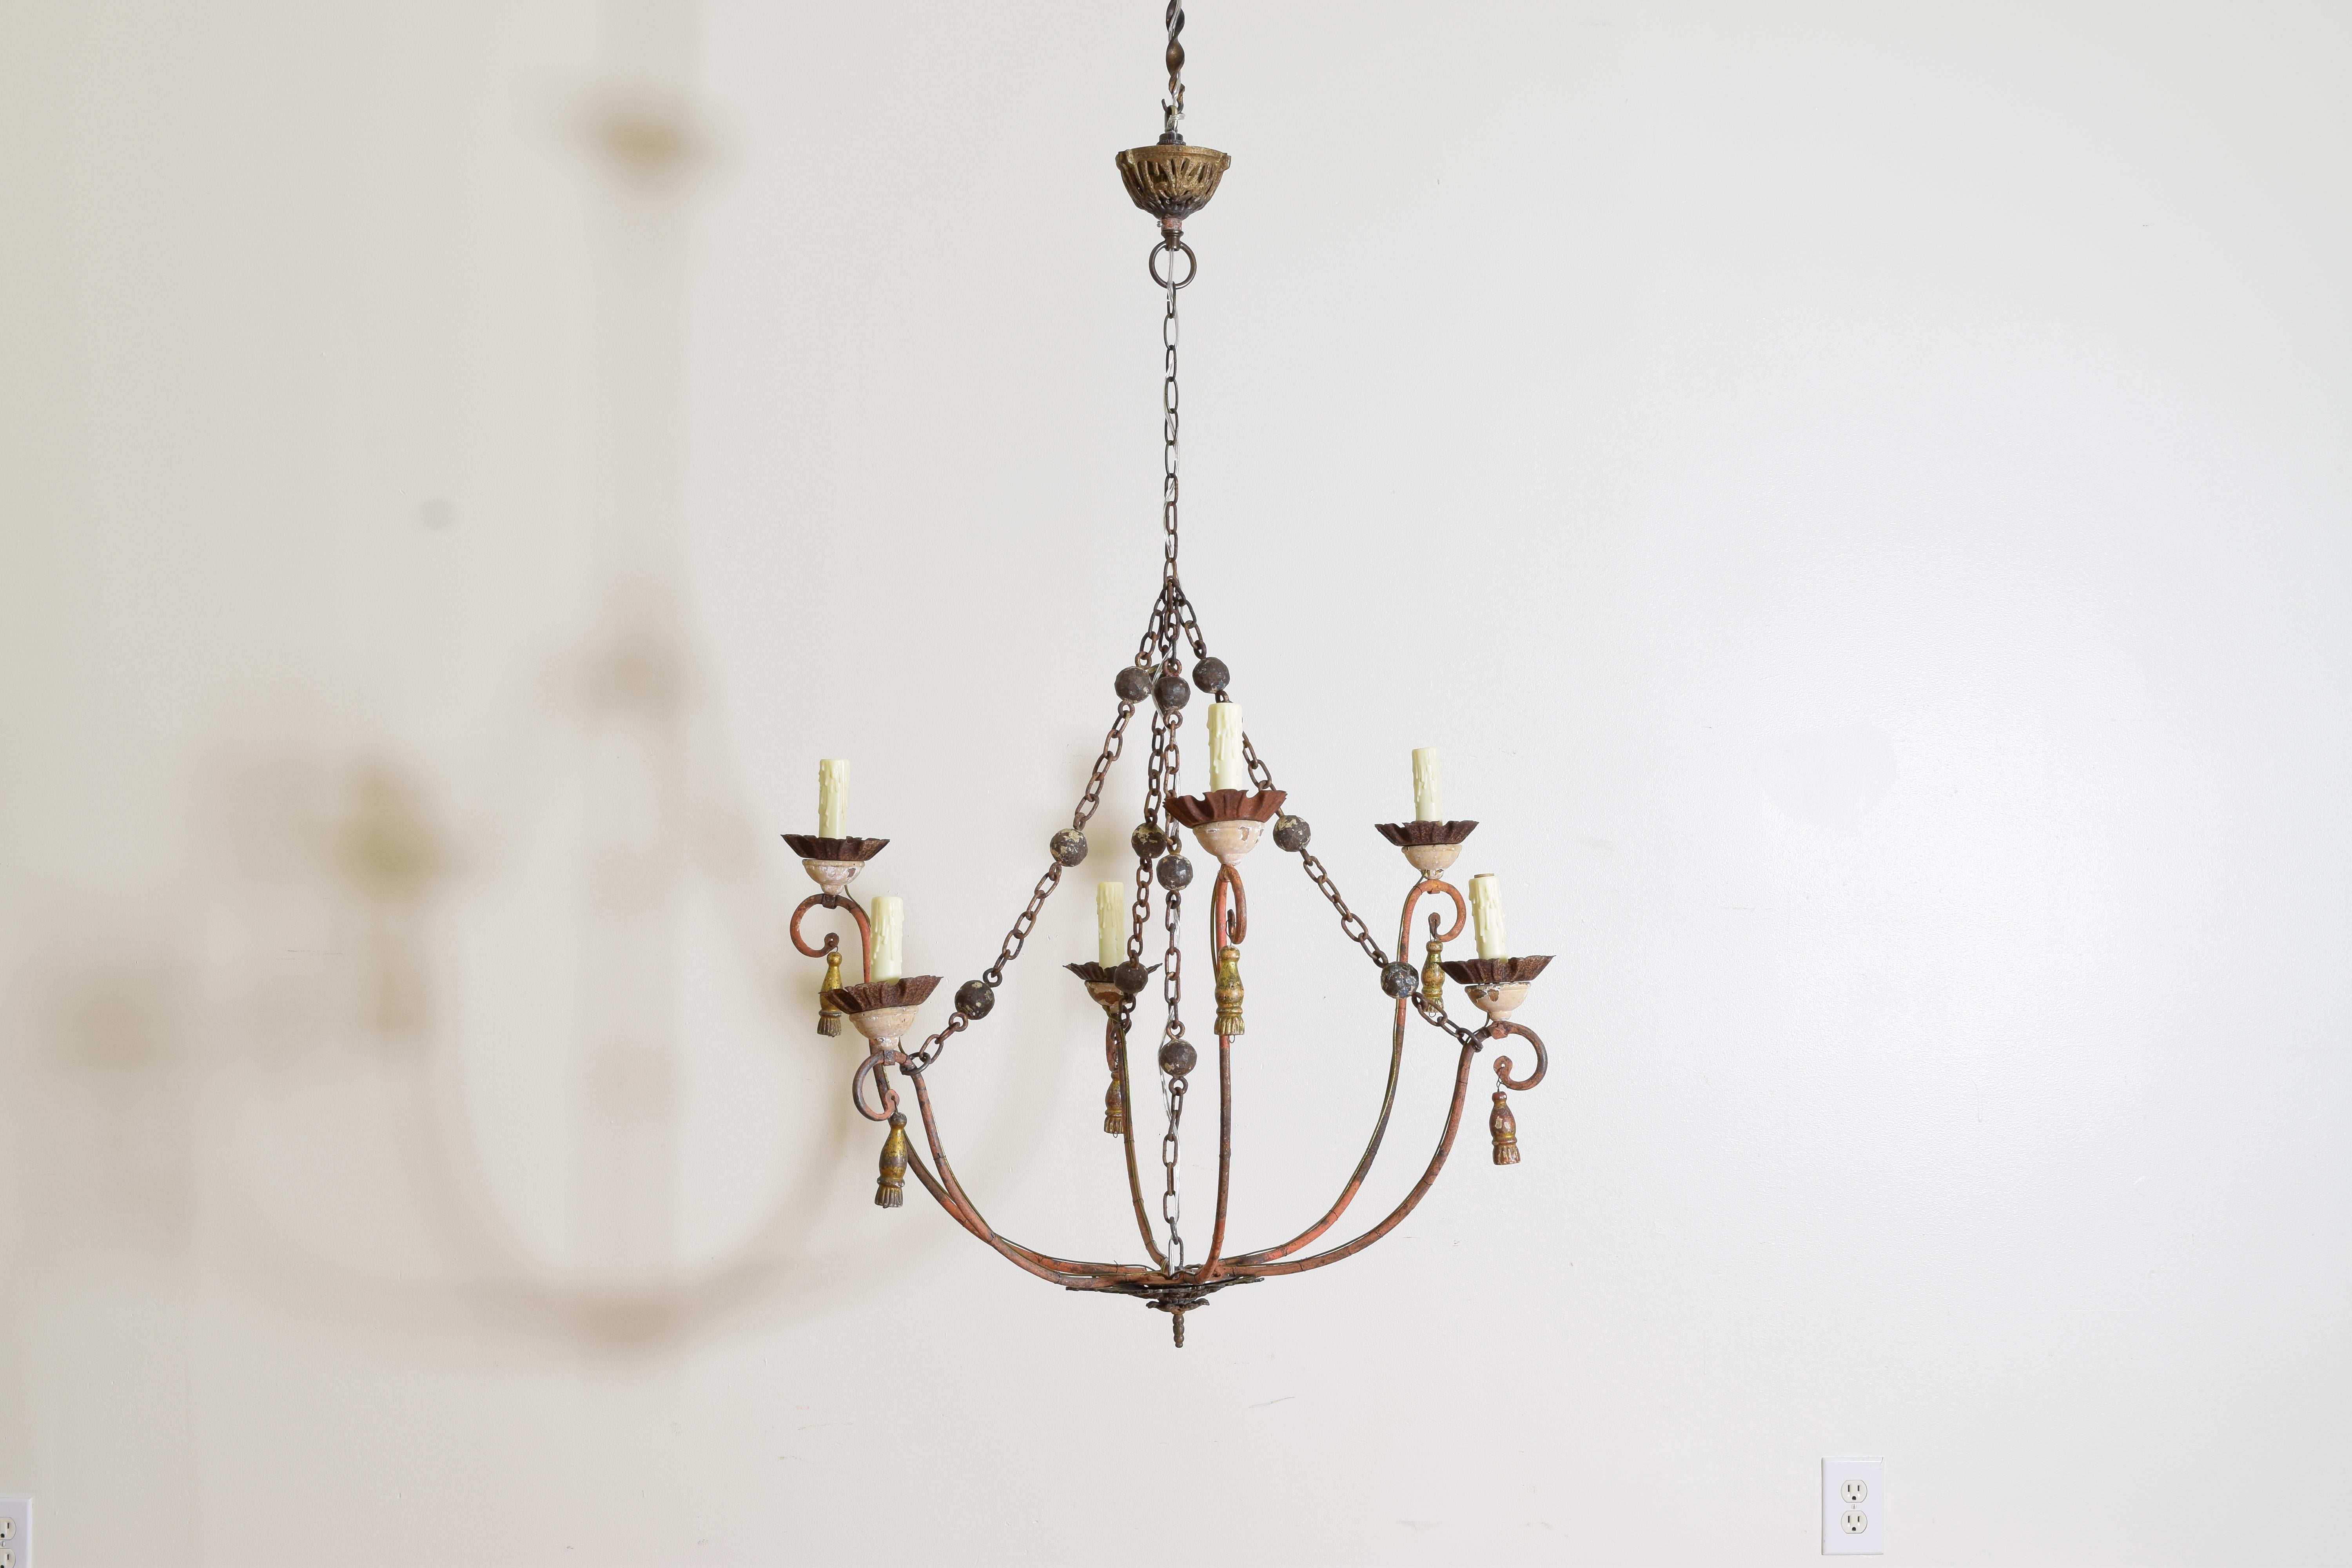 painted chandeliers before and after